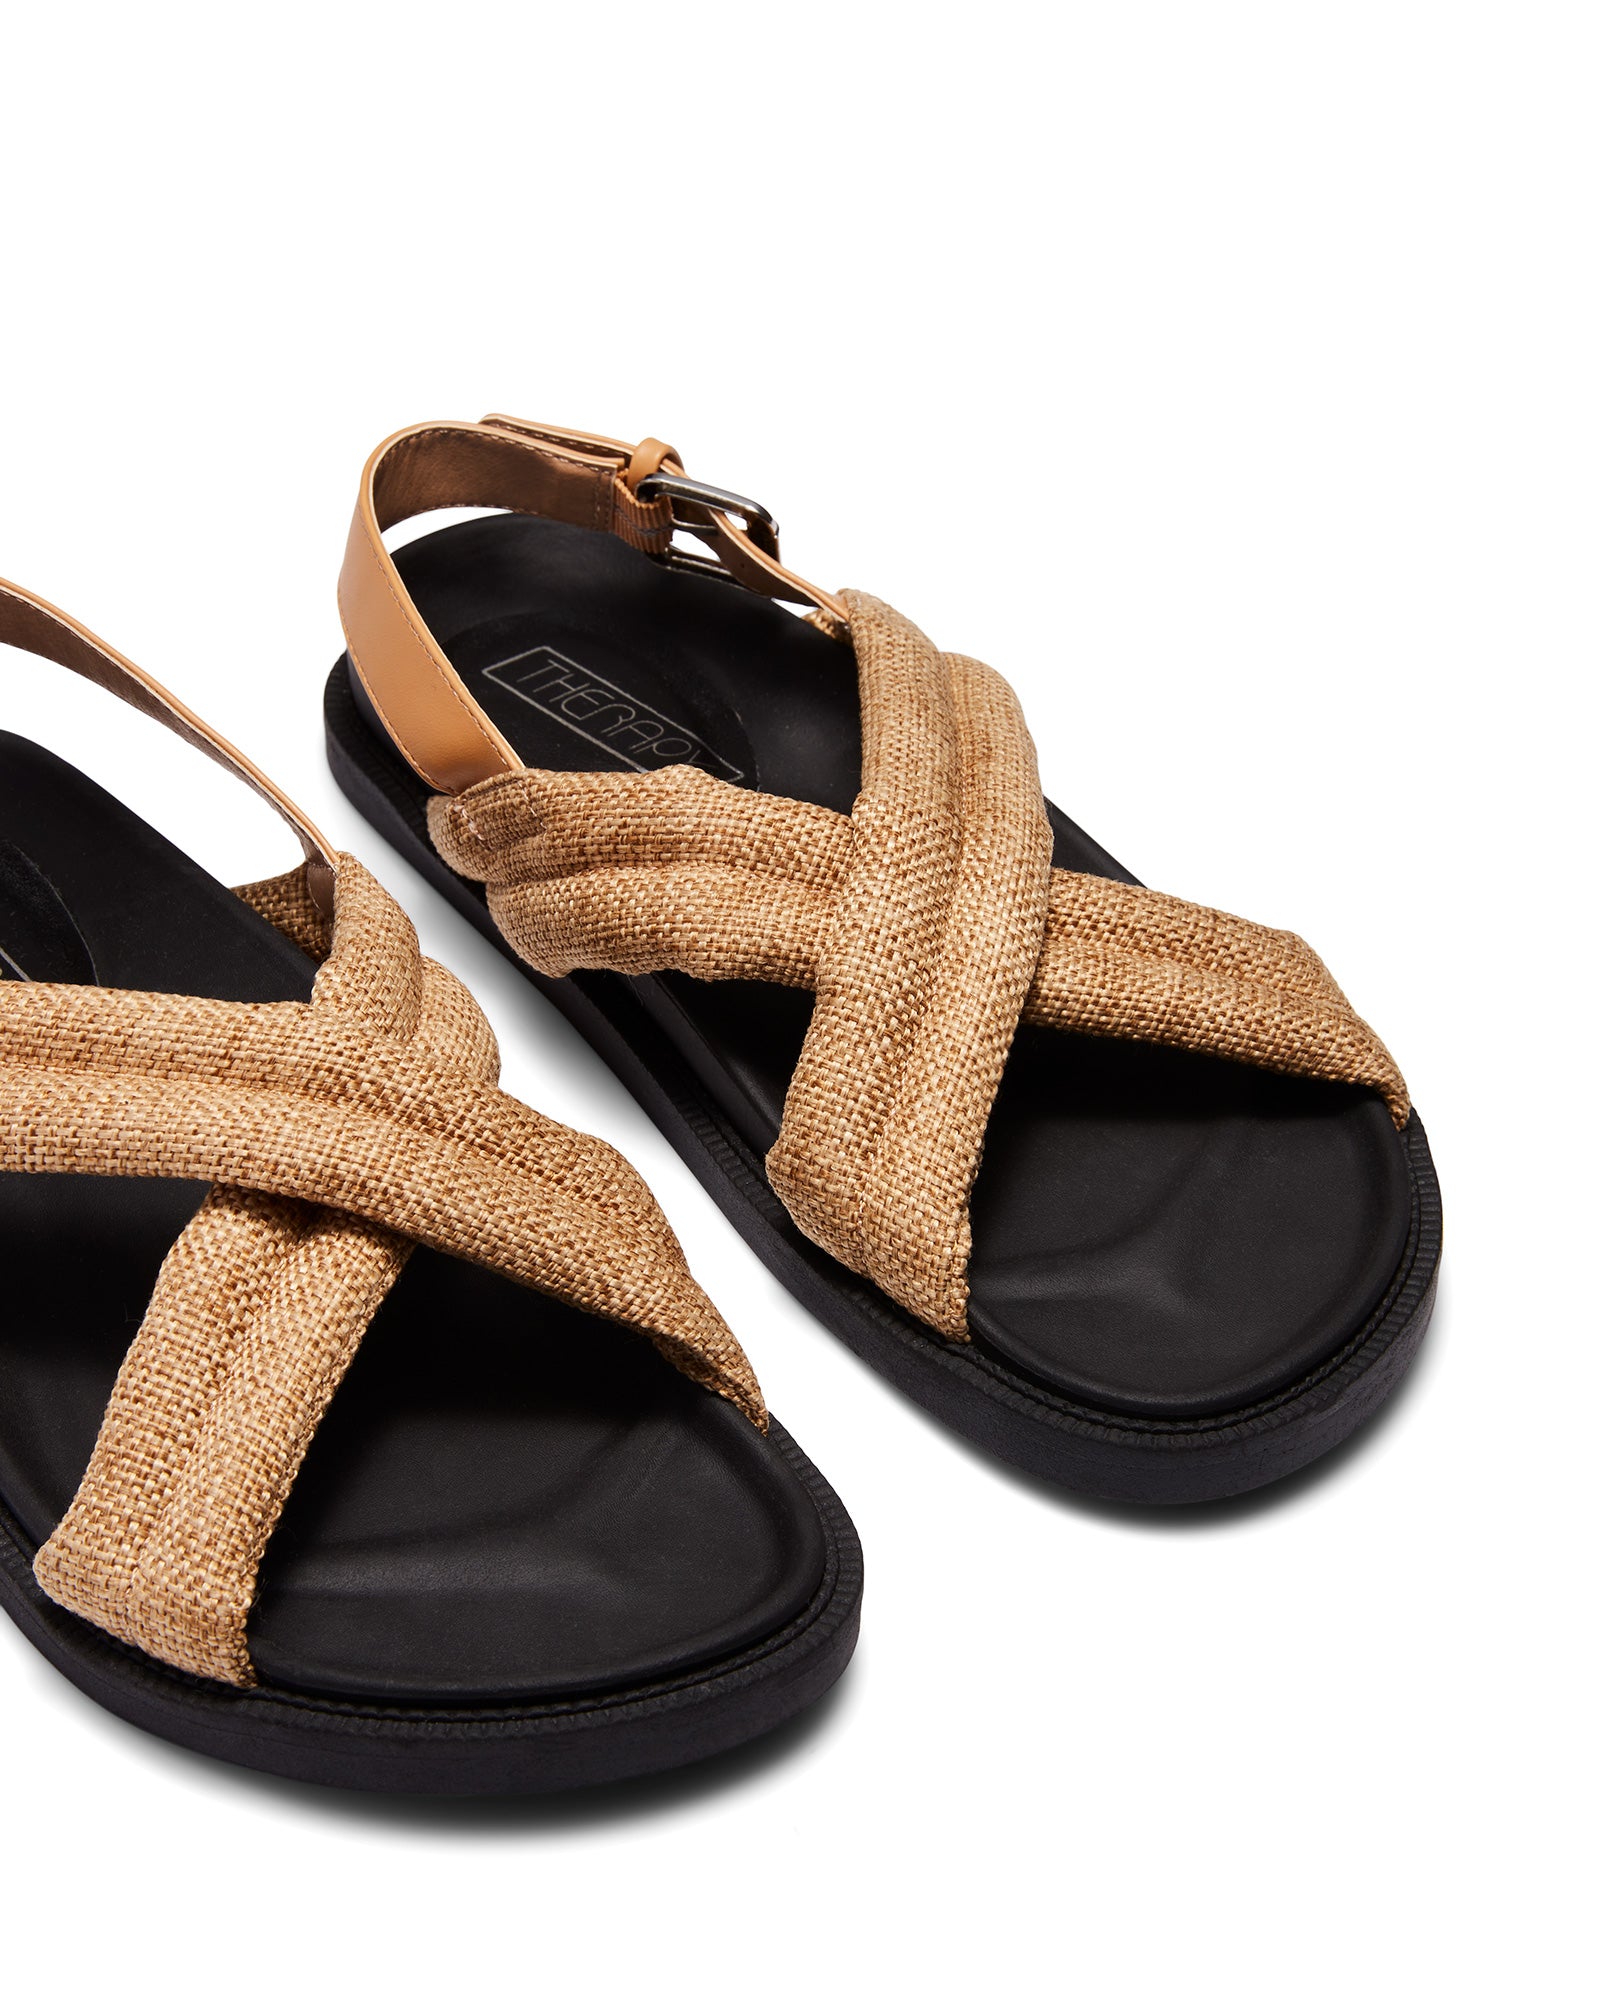 Therapy Shoes Aleesha Natural | Women's Sandals | Flatform | Footbed